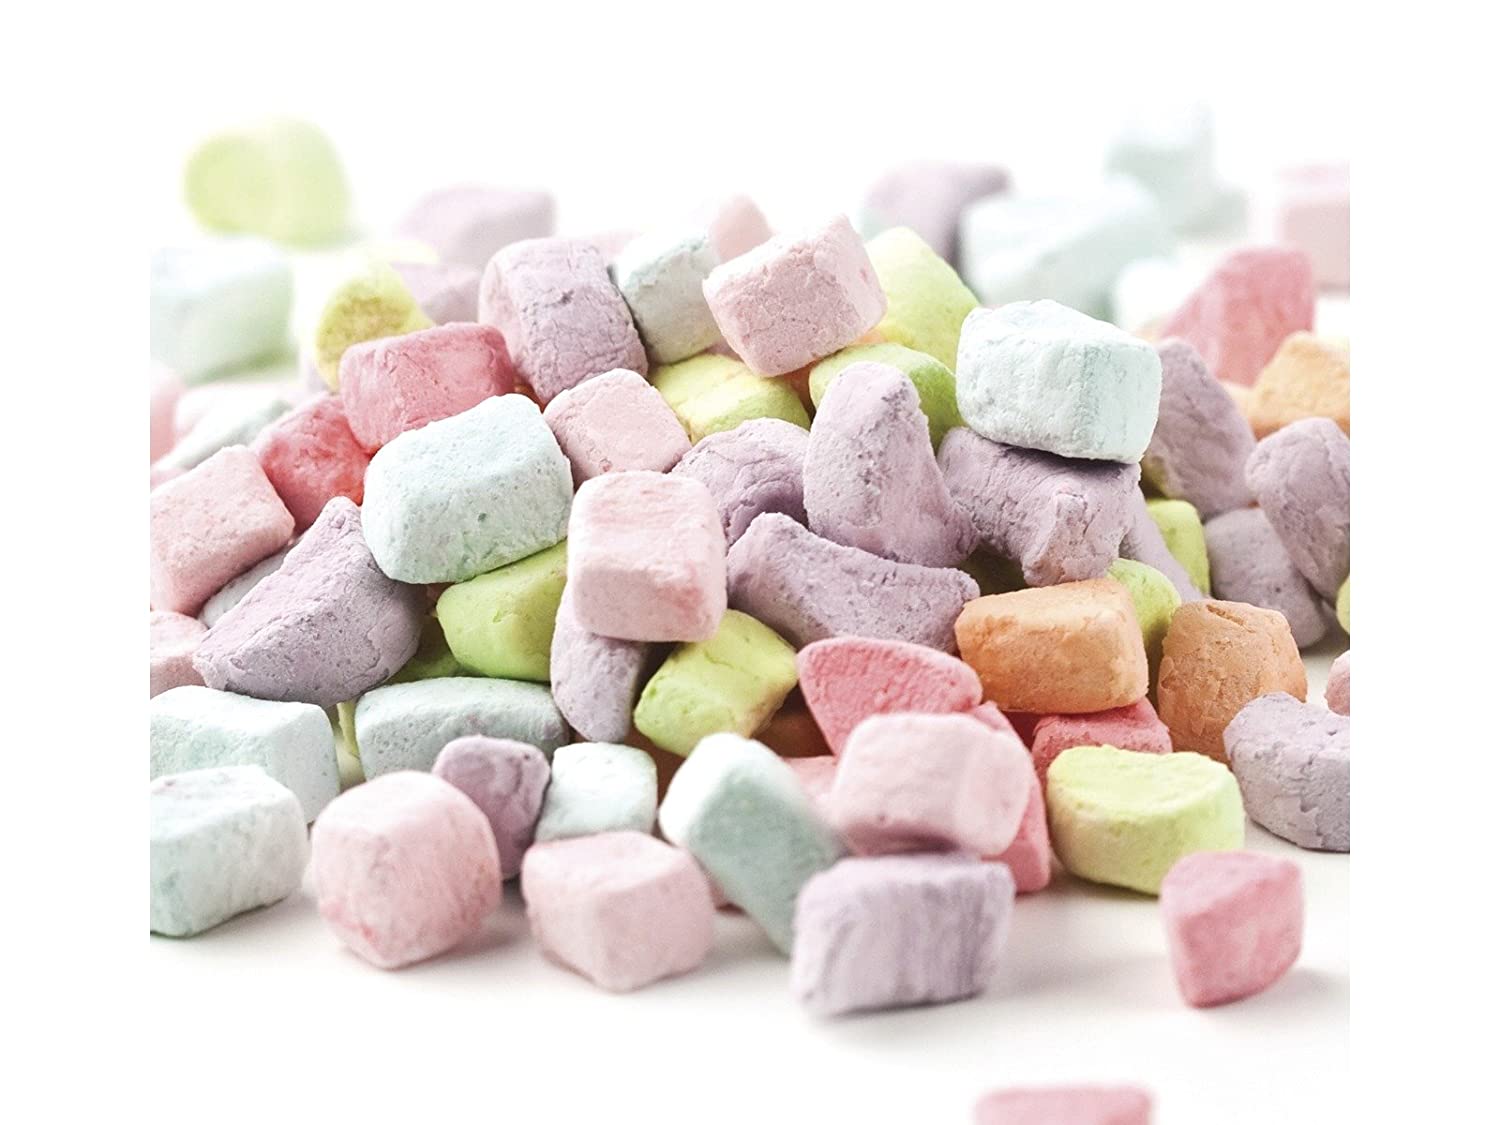 Giant 40lb  Bag Of Just Lucky Charm's Marshmallows